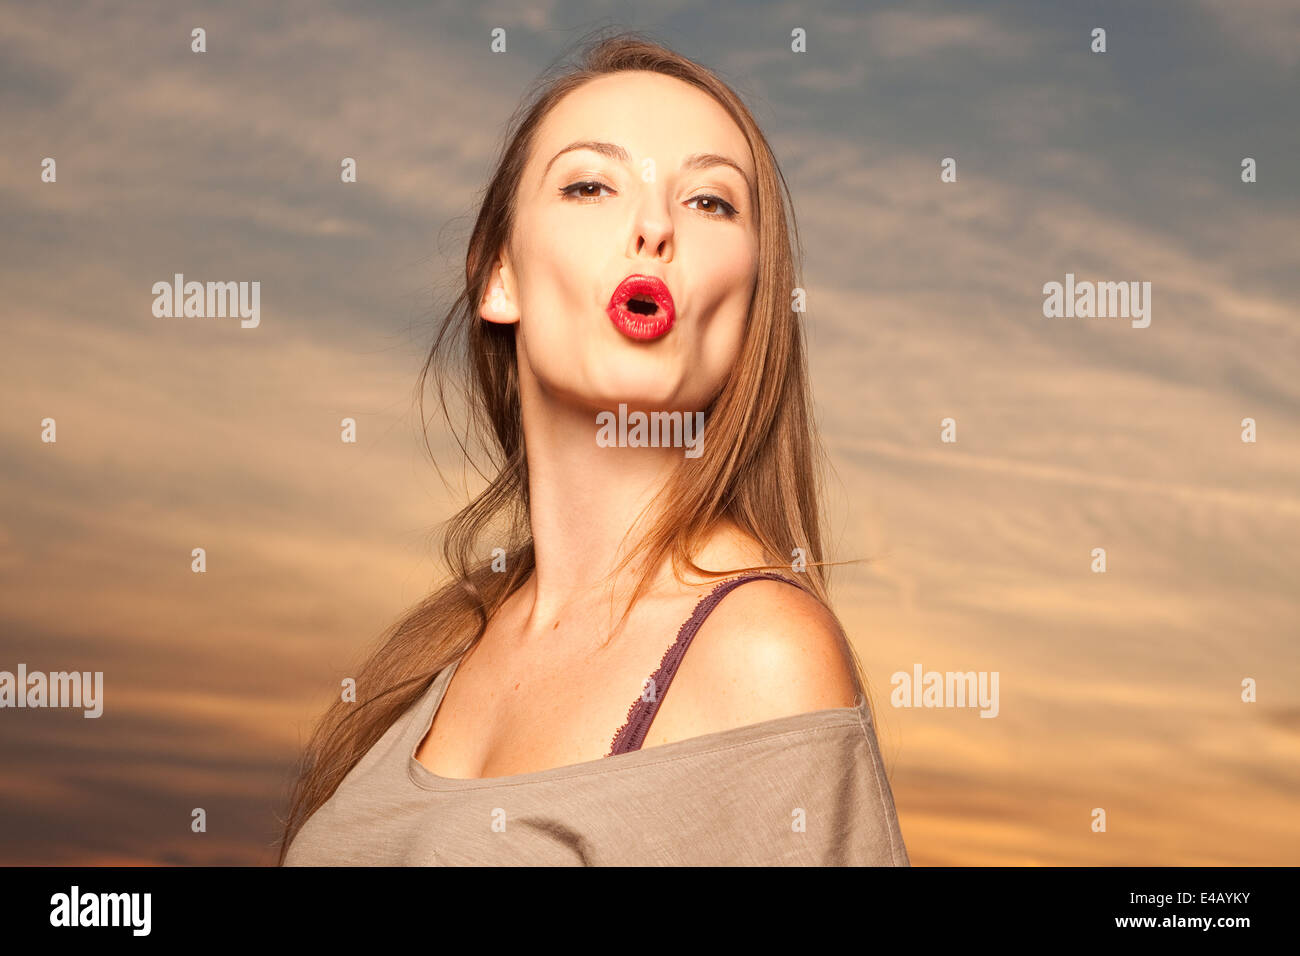 Beautiful, happy young woman in sunlight Stock Photo